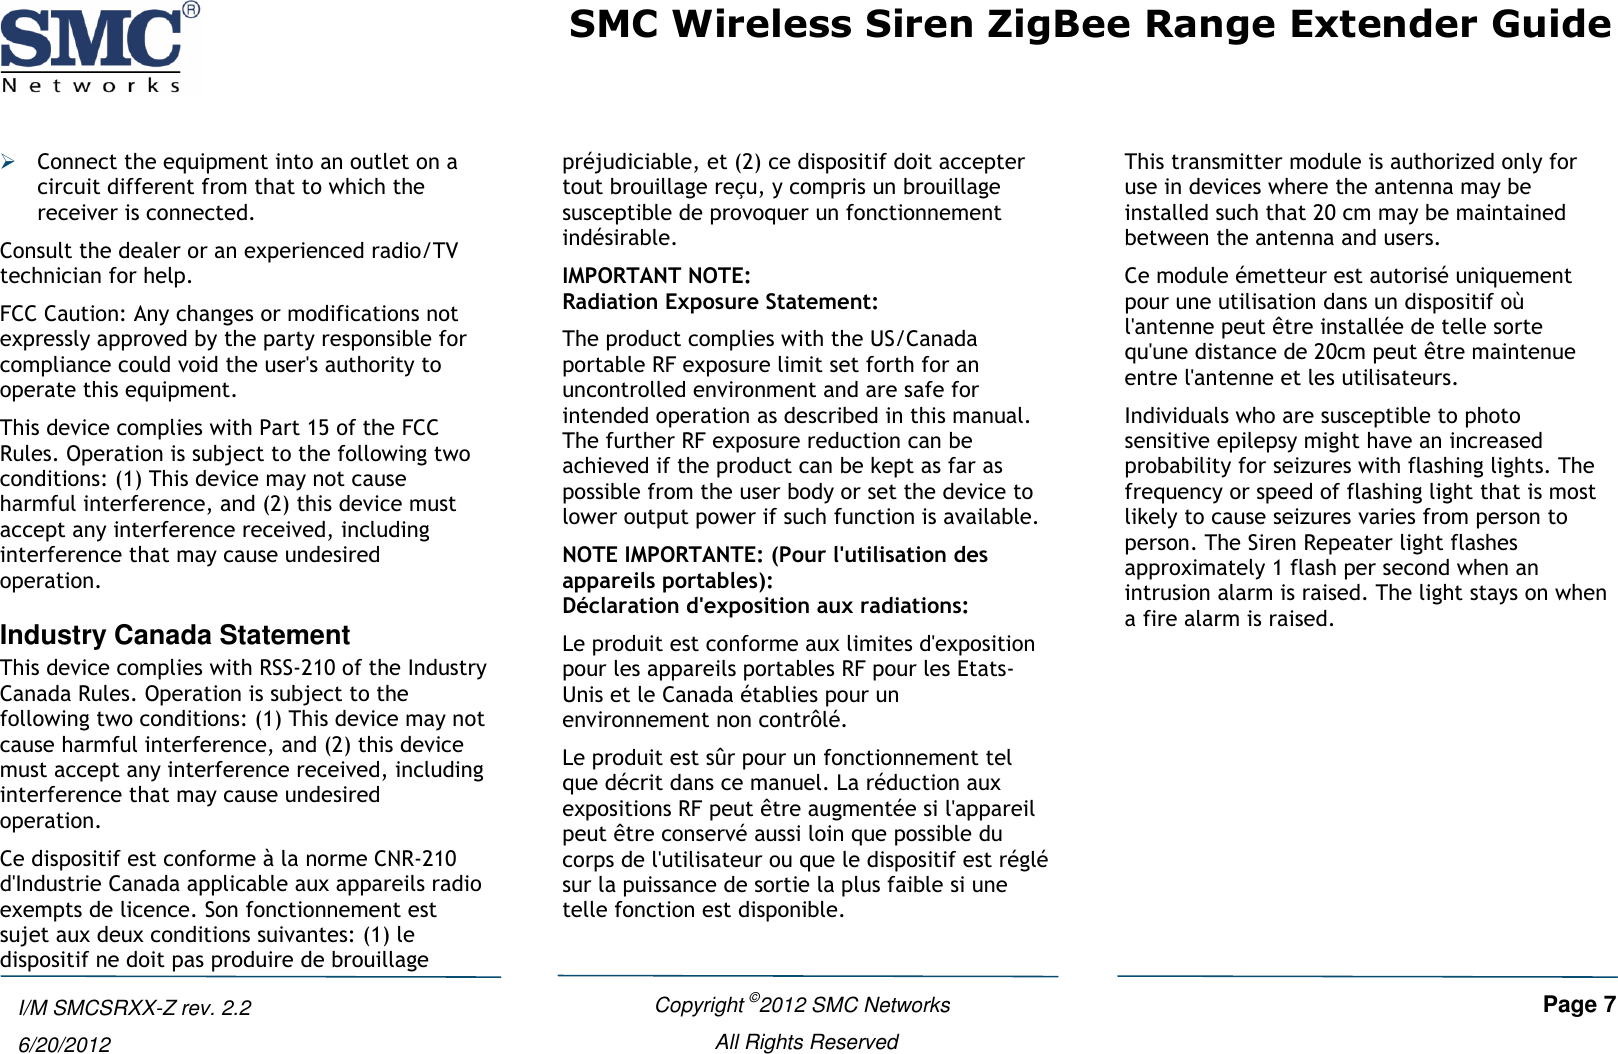 SMC Wireless Siren ZigBee Range Extender Guide   Copyright ©2012 SMC Networks   Page 7 All Rights Reserved  I/M SMCSRXX-Z rev. 2.2 6/20/2012  Connect the equipment into an outlet on a circuit different from that to which the receiver is connected. Consult the dealer or an experienced radio/TV technician for help. FCC Caution: Any changes or modifications not expressly approved by the party responsible for compliance could void the user&apos;s authority to operate this equipment. This device complies with Part 15 of the FCC Rules. Operation is subject to the following two conditions: (1) This device may not cause harmful interference, and (2) this device must accept any interference received, including interference that may cause undesired operation. Industry Canada Statement This device complies with RSS-210 of the Industry Canada Rules. Operation is subject to the following two conditions: (1) This device may not cause harmful interference, and (2) this device must accept any interference received, including interference that may cause undesired operation. Ce dispositif est conforme à la norme CNR-210 d&apos;Industrie Canada applicable aux appareils radio exempts de licence. Son fonctionnement est sujet aux deux conditions suivantes: (1) le dispositif ne doit pas produire de brouillage préjudiciable, et (2) ce dispositif doit accepter tout brouillage reçu, y compris un brouillage susceptible de provoquer un fonctionnement indésirable. IMPORTANT NOTE: Radiation Exposure Statement: The product complies with the US/Canada portable RF exposure limit set forth for an uncontrolled environment and are safe for intended operation as described in this manual. The further RF exposure reduction can be achieved if the product can be kept as far as possible from the user body or set the device to lower output power if such function is available. NOTE IMPORTANTE: (Pour l&apos;utilisation des appareils portables): Déclaration d&apos;exposition aux radiations: Le produit est conforme aux limites d&apos;exposition pour les appareils portables RF pour les Etats-Unis et le Canada établies pour un environnement non contrôlé. Le produit est sûr pour un fonctionnement tel que décrit dans ce manuel. La réduction aux expositions RF peut être augmentée si l&apos;appareil peut être conservé aussi loin que possible du corps de l&apos;utilisateur ou que le dispositif est réglé sur la puissance de sortie la plus faible si une telle fonction est disponible. This transmitter module is authorized only for use in devices where the antenna may be installed such that 20 cm may be maintained between the antenna and users. Ce module émetteur est autorisé uniquement pour une utilisation dans un dispositif où l&apos;antenne peut être installée de telle sorte qu&apos;une distance de 20cm peut être maintenue entre l&apos;antenne et les utilisateurs. Individuals who are susceptible to photo sensitive epilepsy might have an increased probability for seizures with flashing lights. The frequency or speed of flashing light that is most likely to cause seizures varies from person to person. The Siren Repeater light flashes approximately 1 flash per second when an intrusion alarm is raised. The light stays on when a fire alarm is raised.   